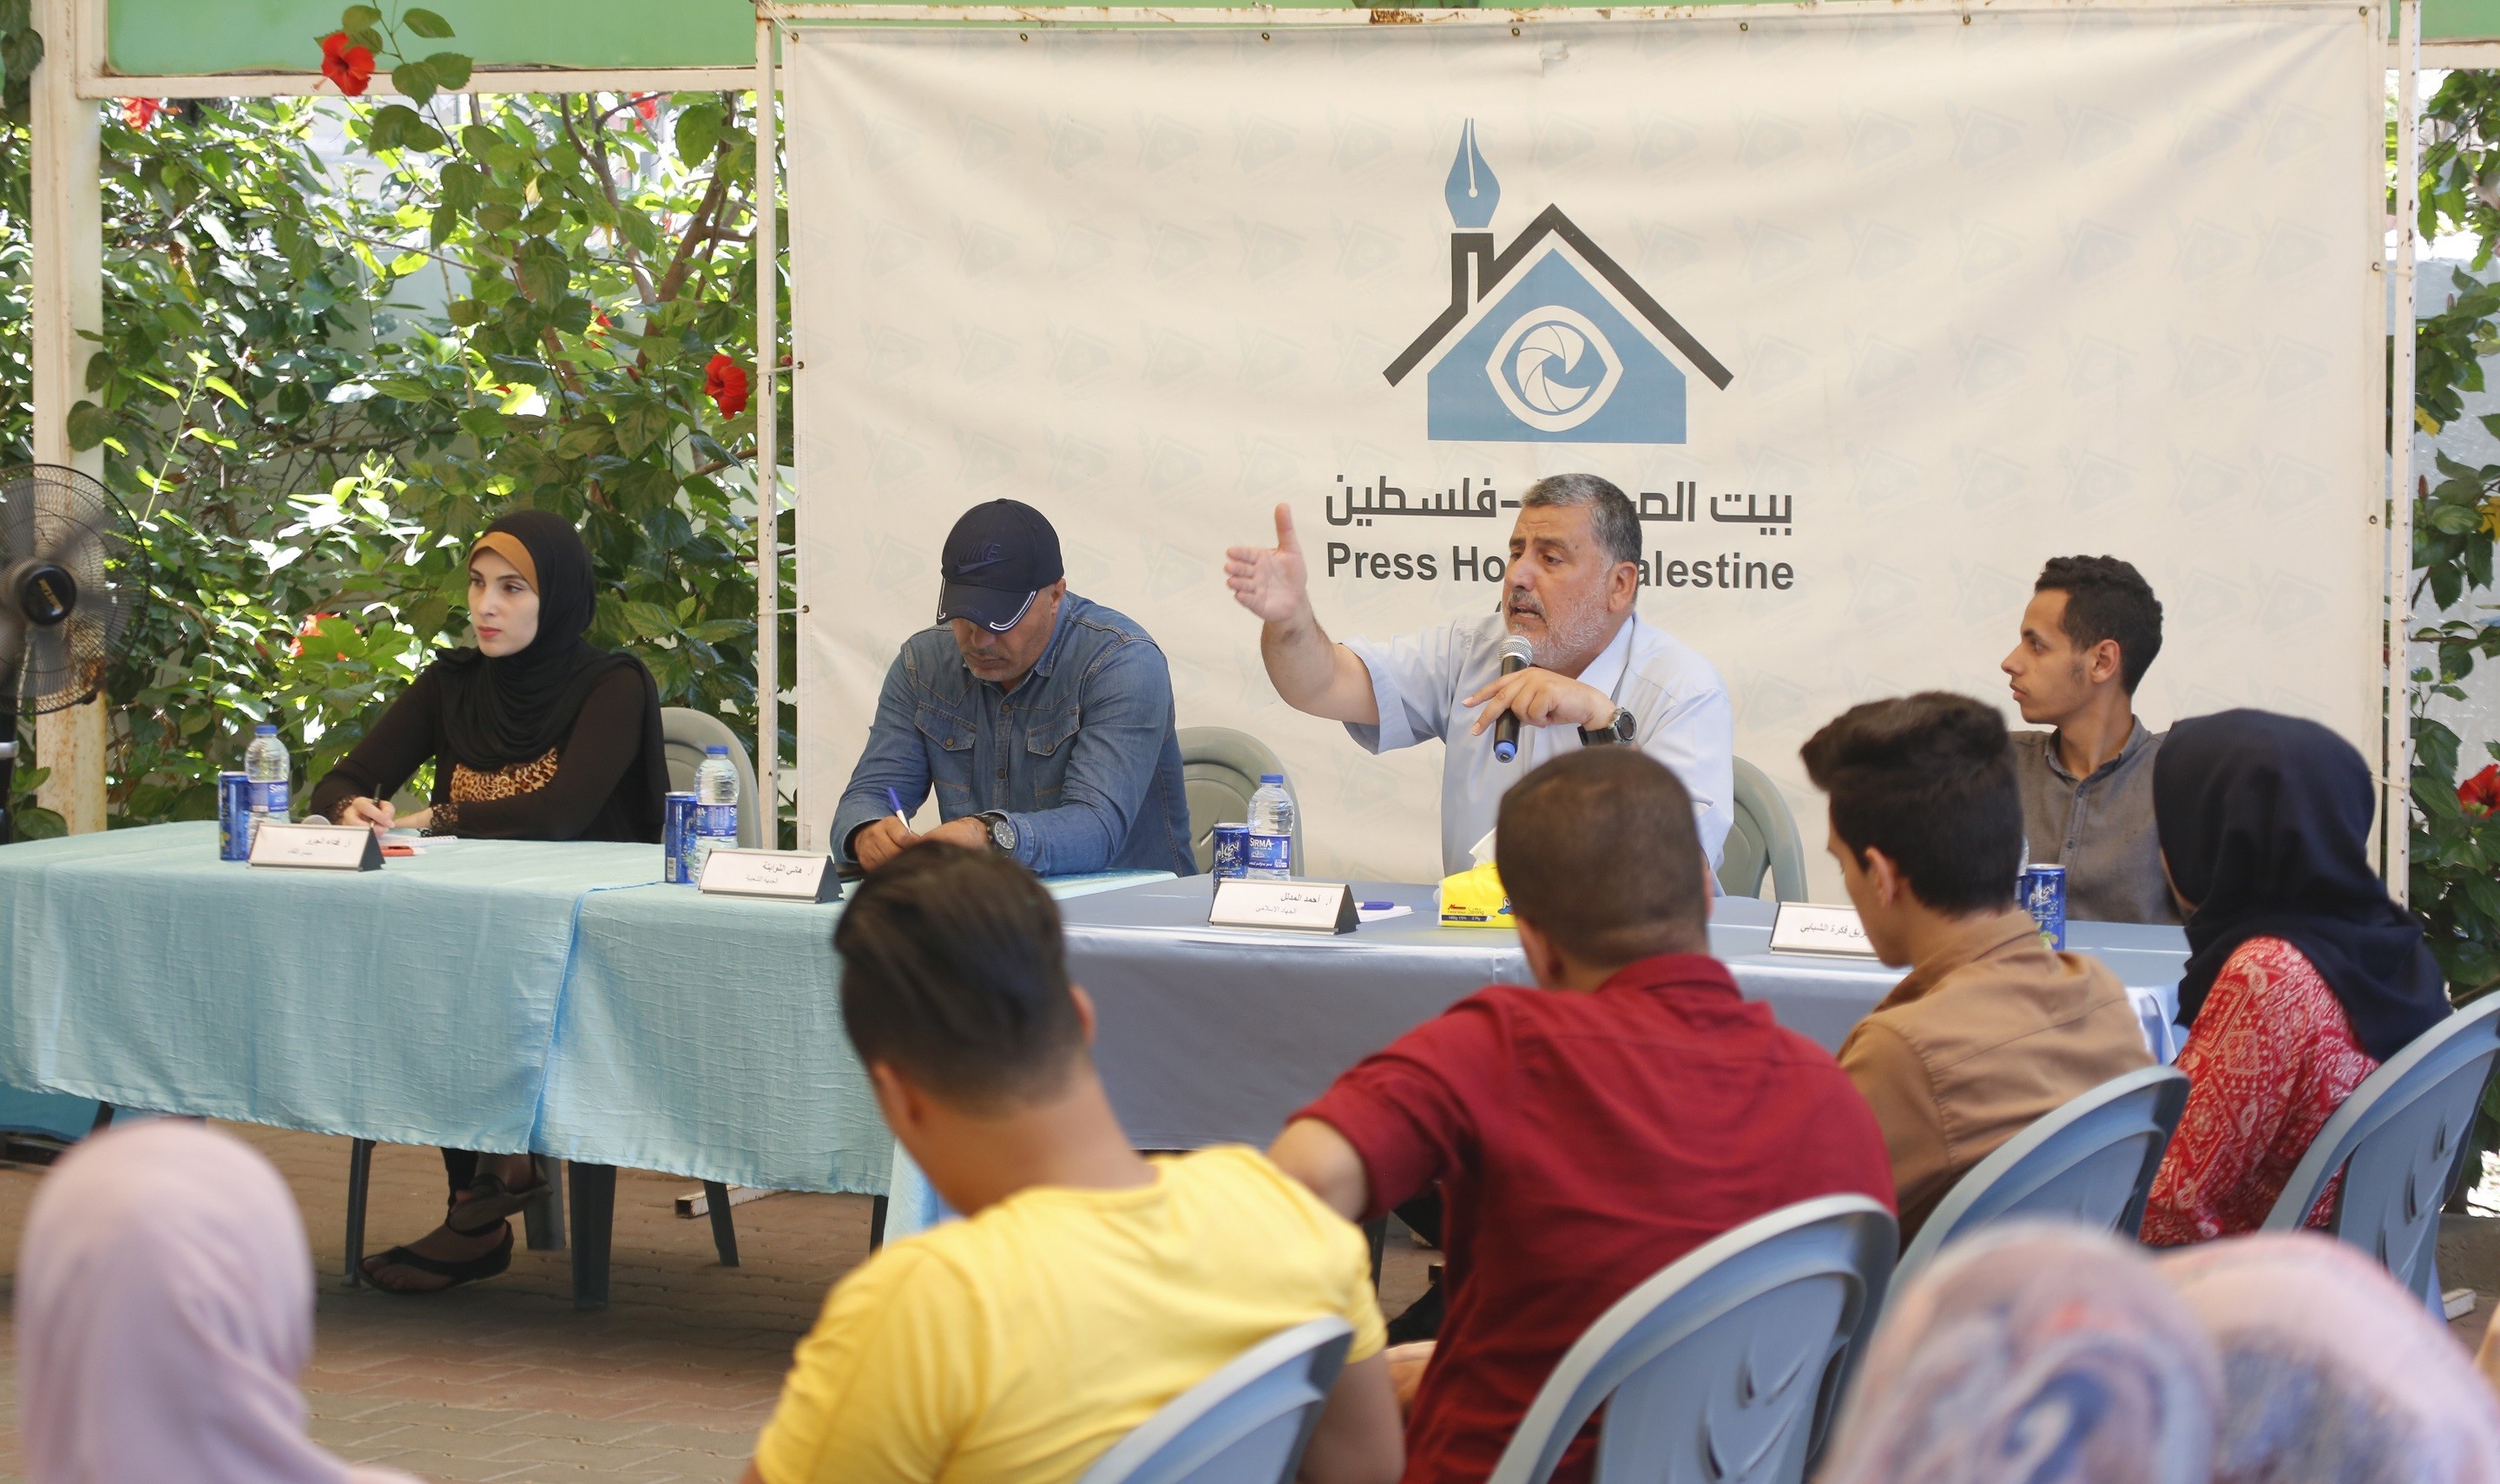 Press House organizes a political meeting about the latest developments related to the Israeli annexation plan